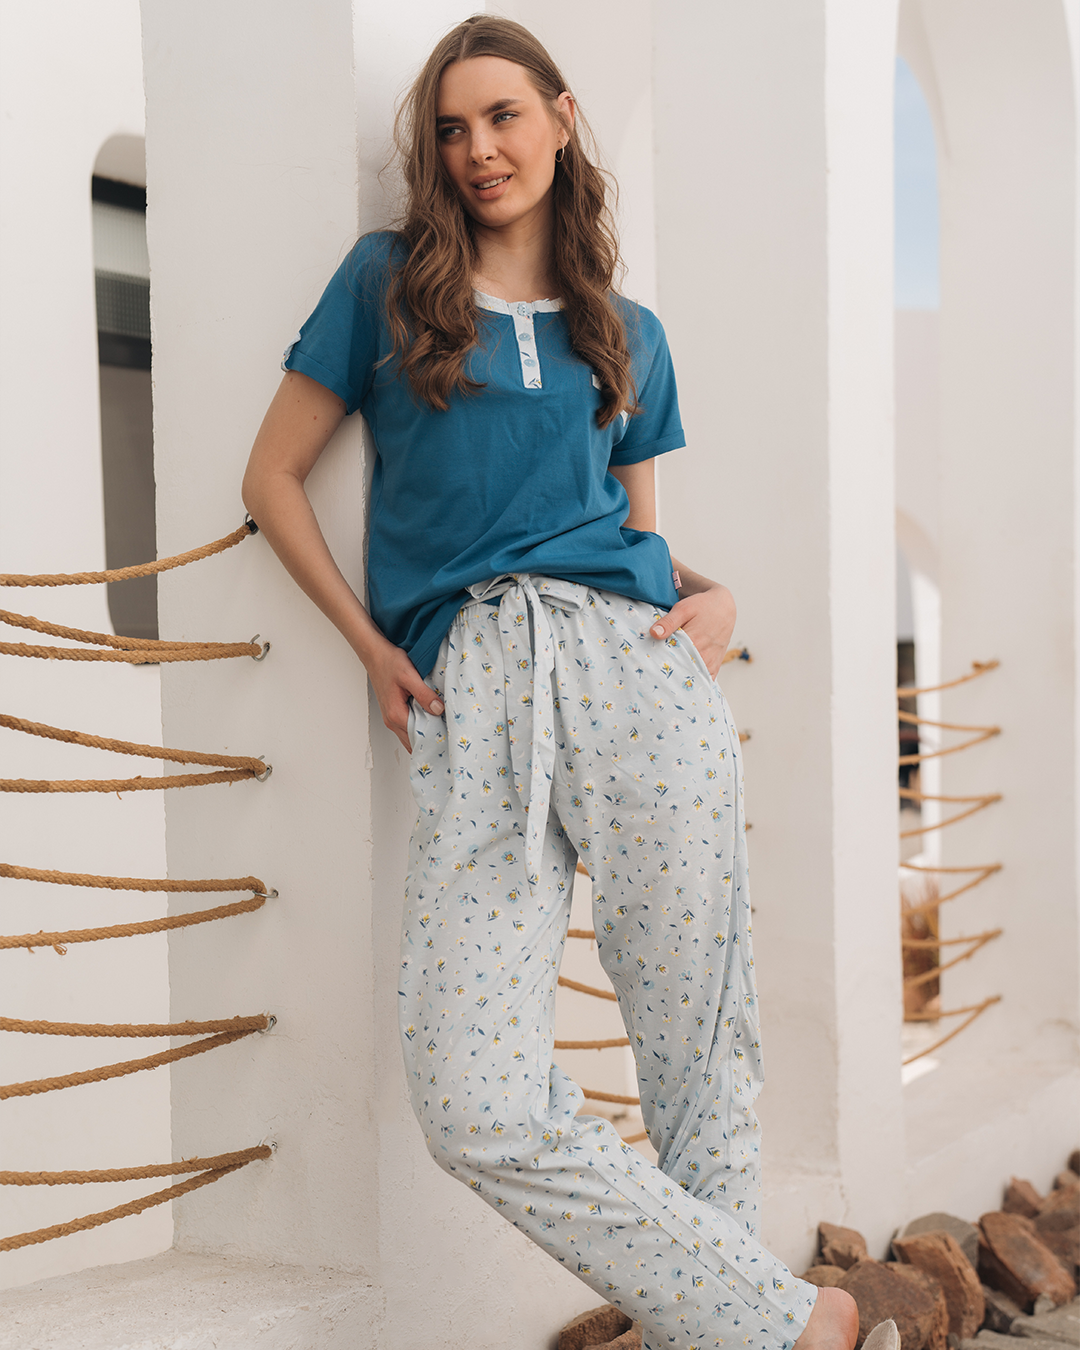 Women's pajamas with floral printed brassieres